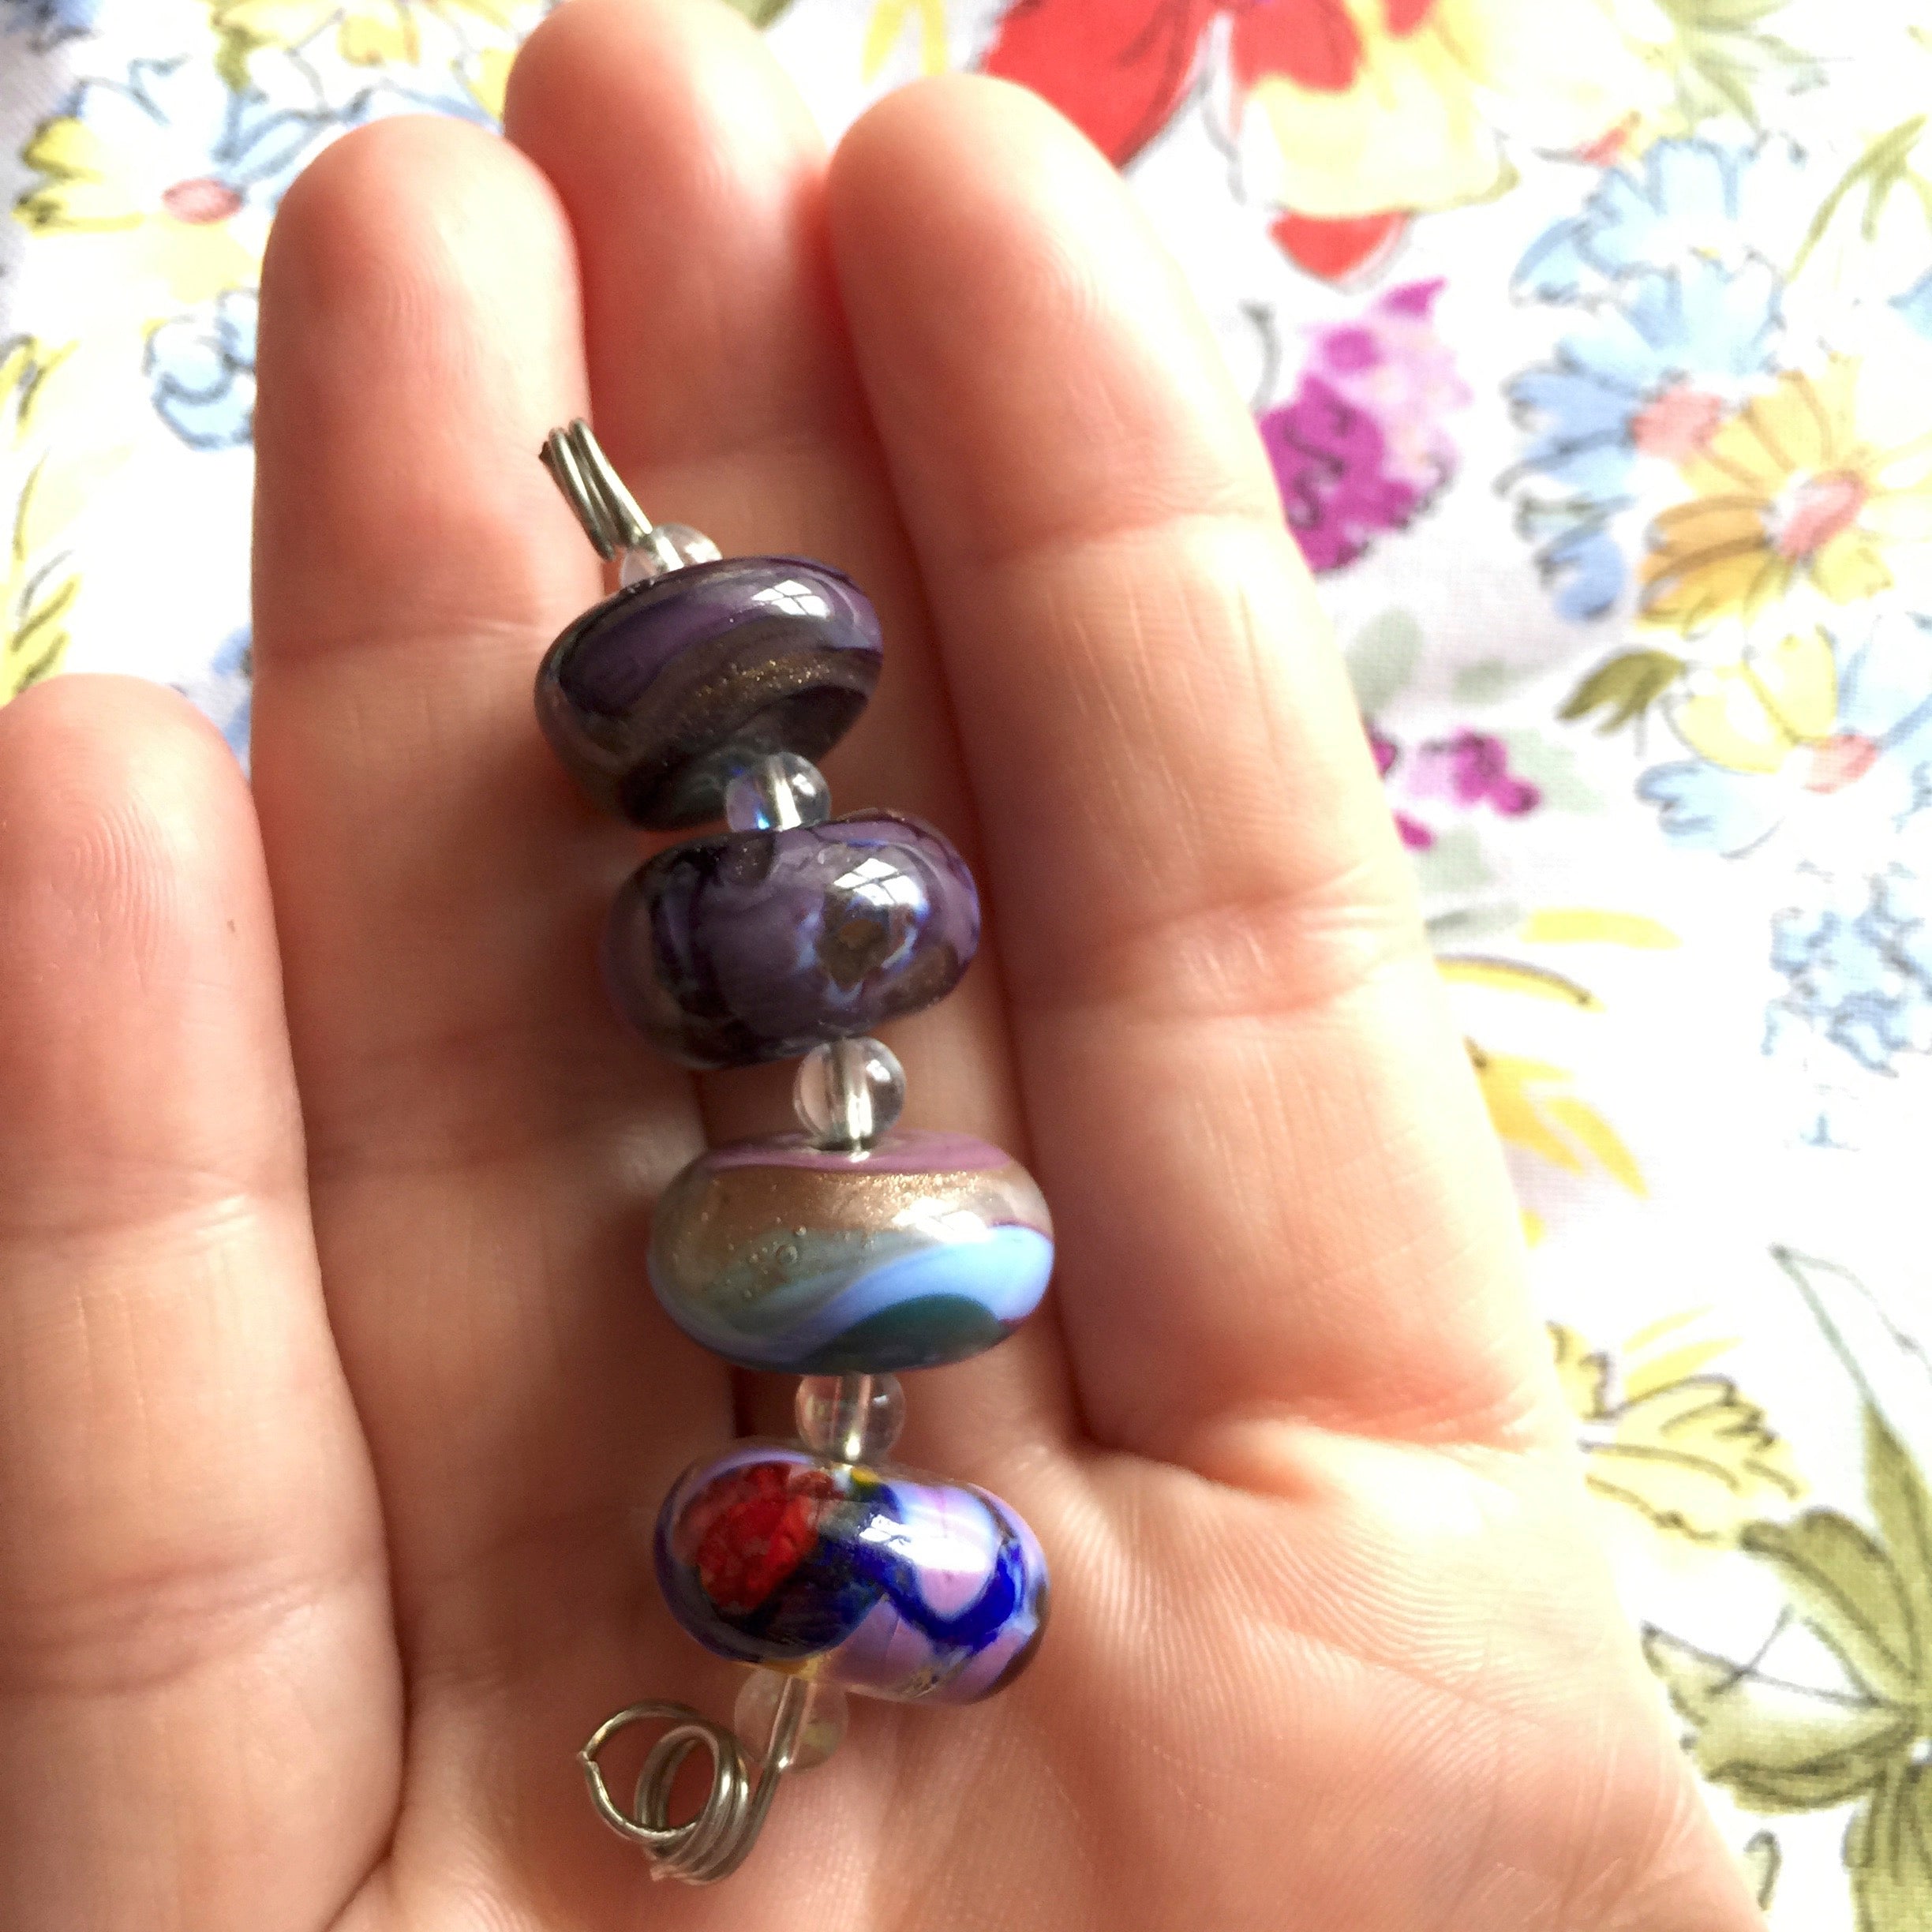 Set of 4 Funky and Unique Handcrafted Lampwork Glass Beads in purples and blues.